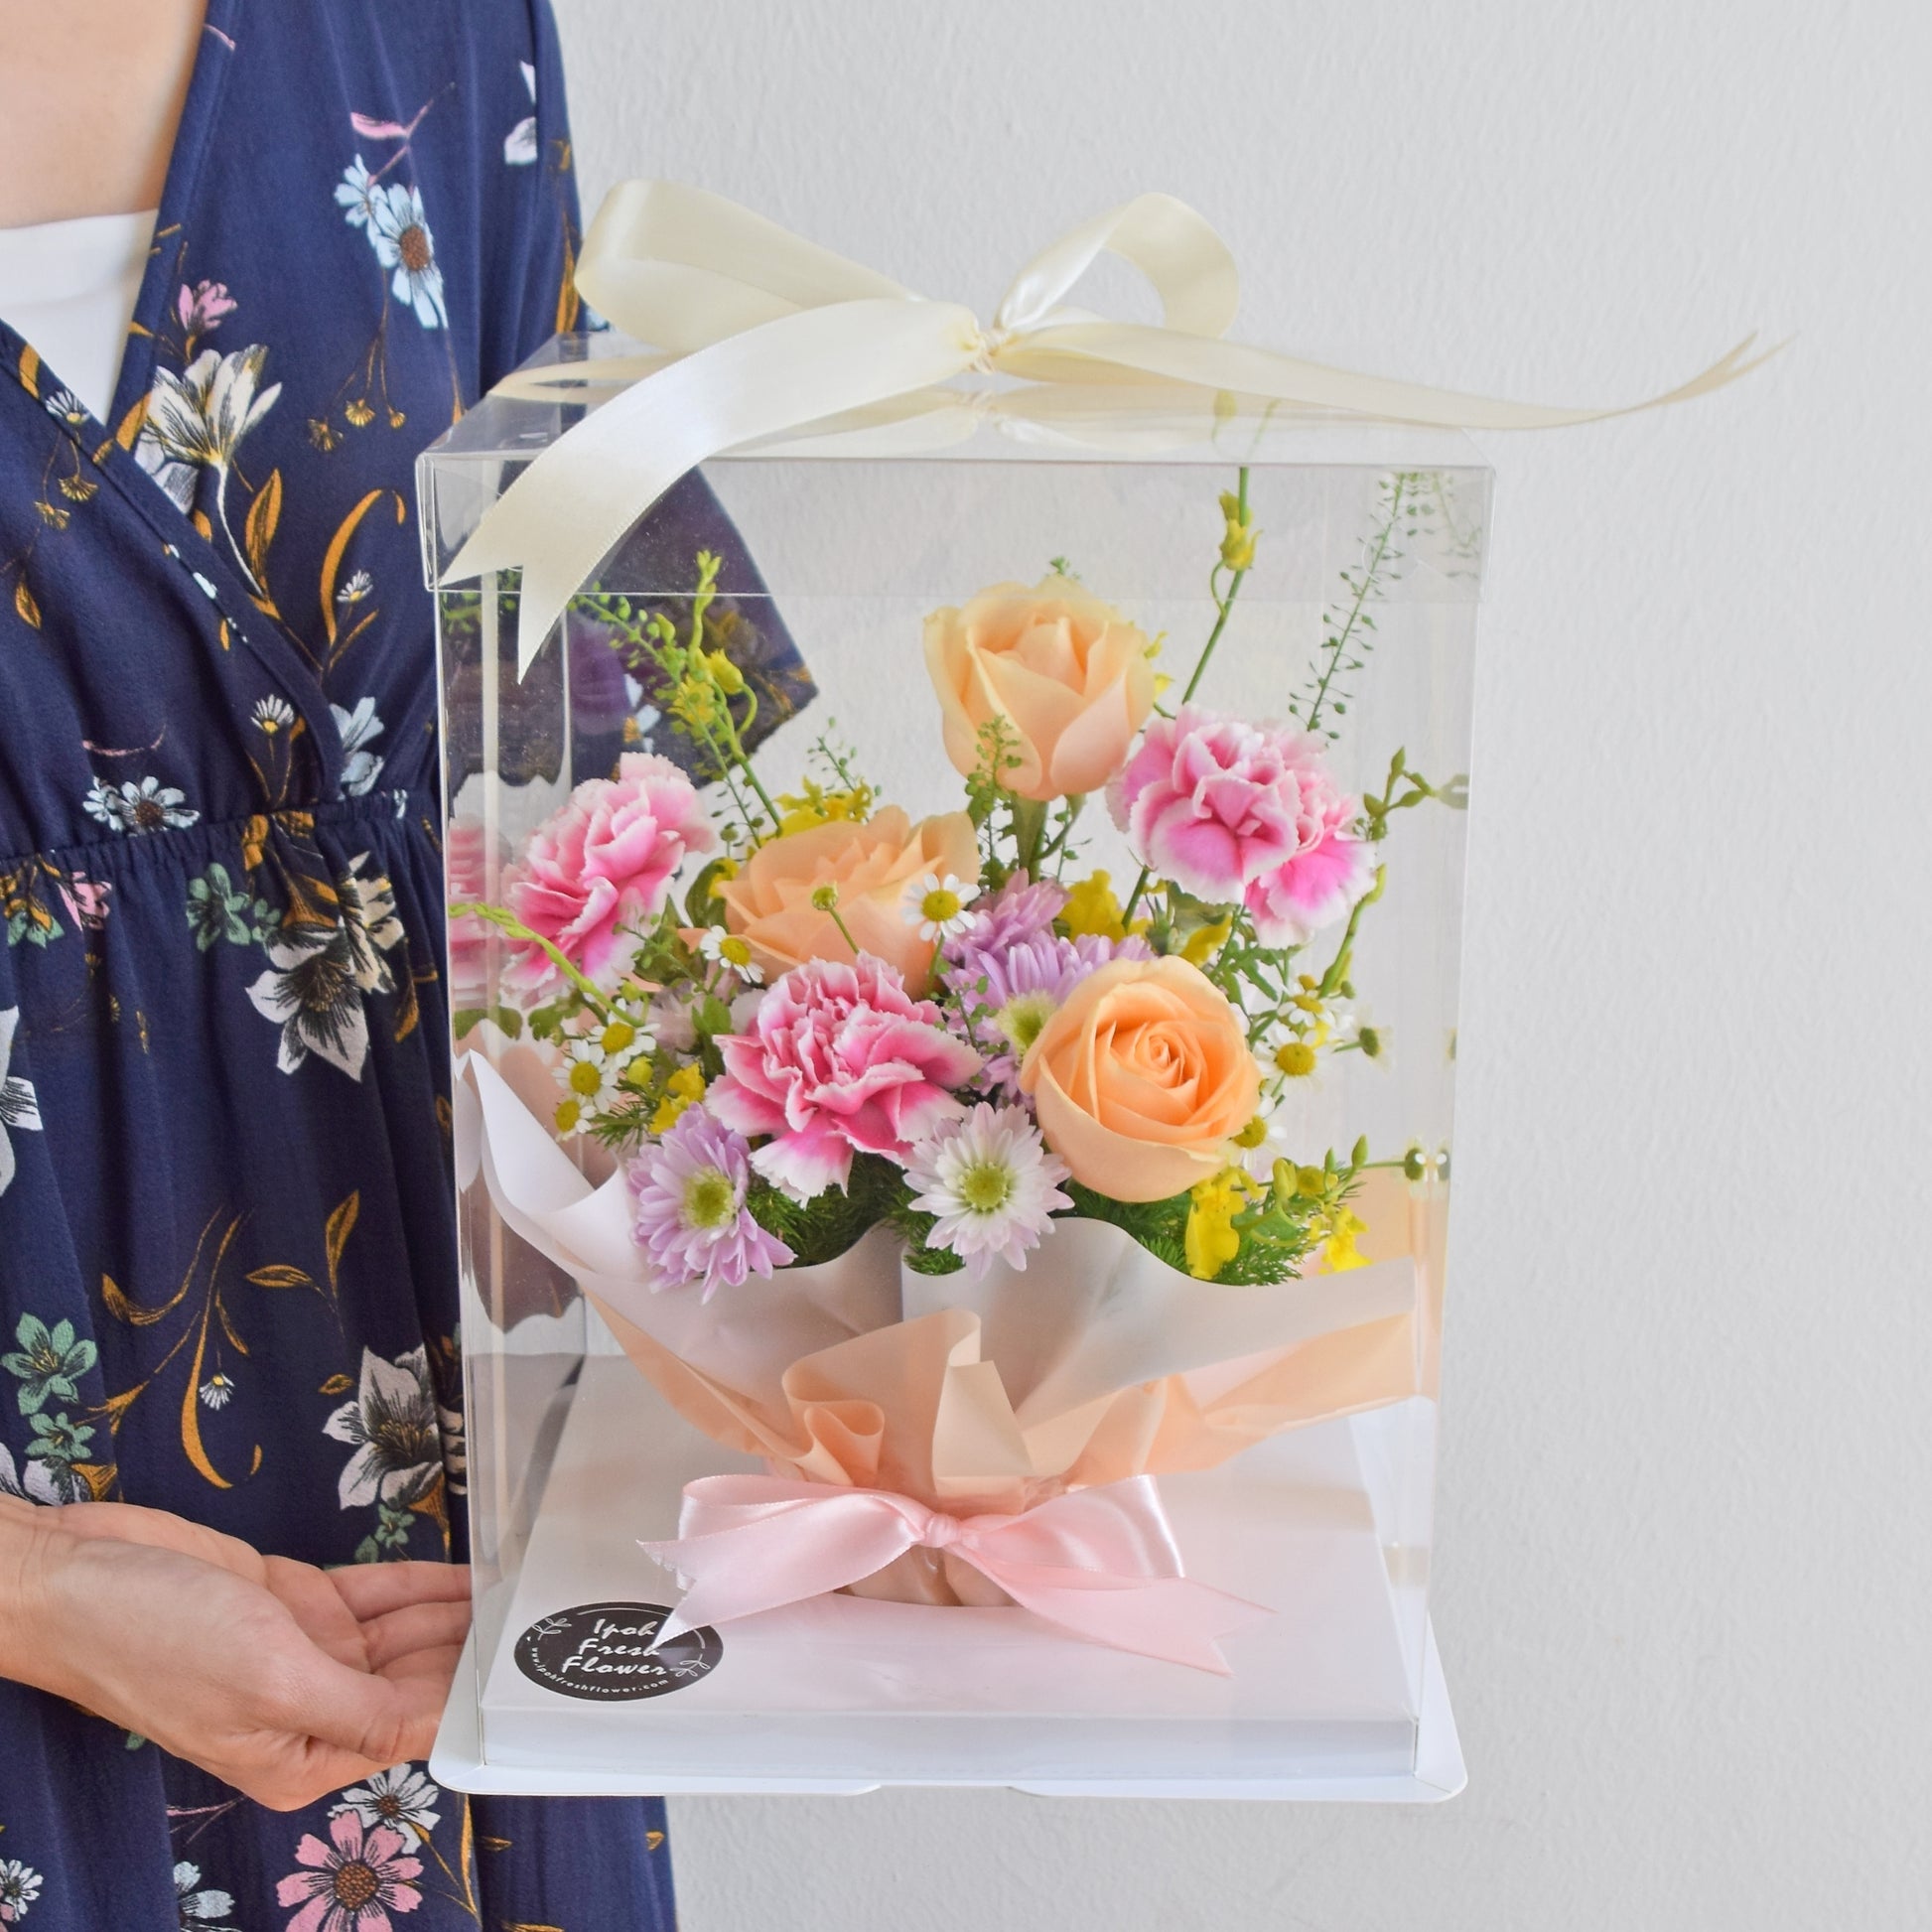 Phoebe | Mother's Day Special Flower Bloom Box